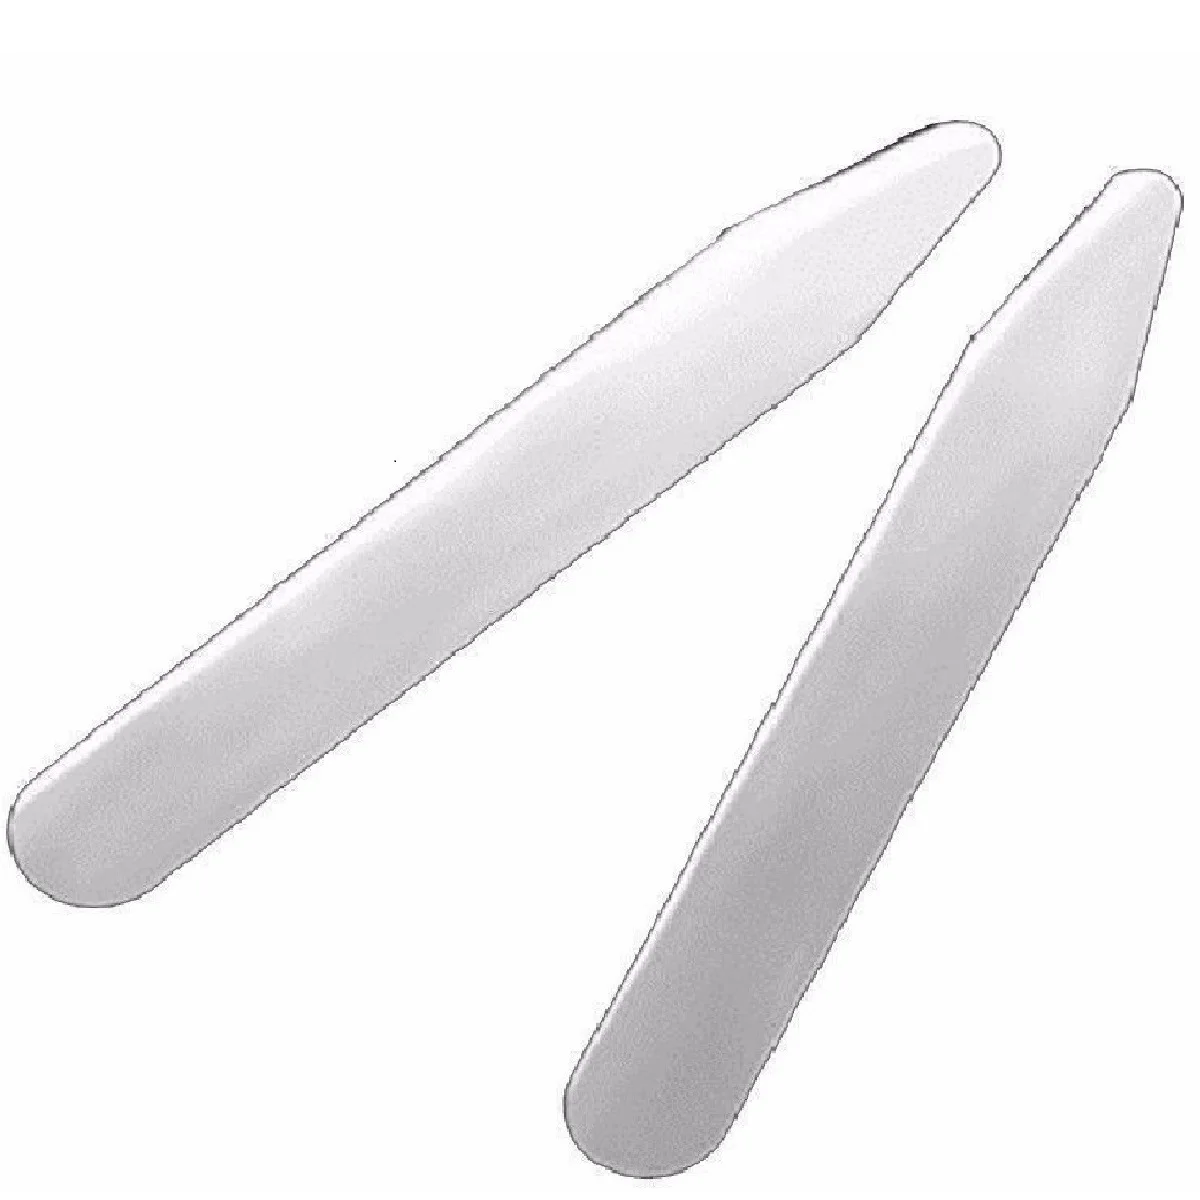 2.5 Inch Metal Collar Stiffeners MODERN GOODS SHOP Stainless Steel Collar Stays With Laser Engraved Hawaiian Flower Design Made In USA